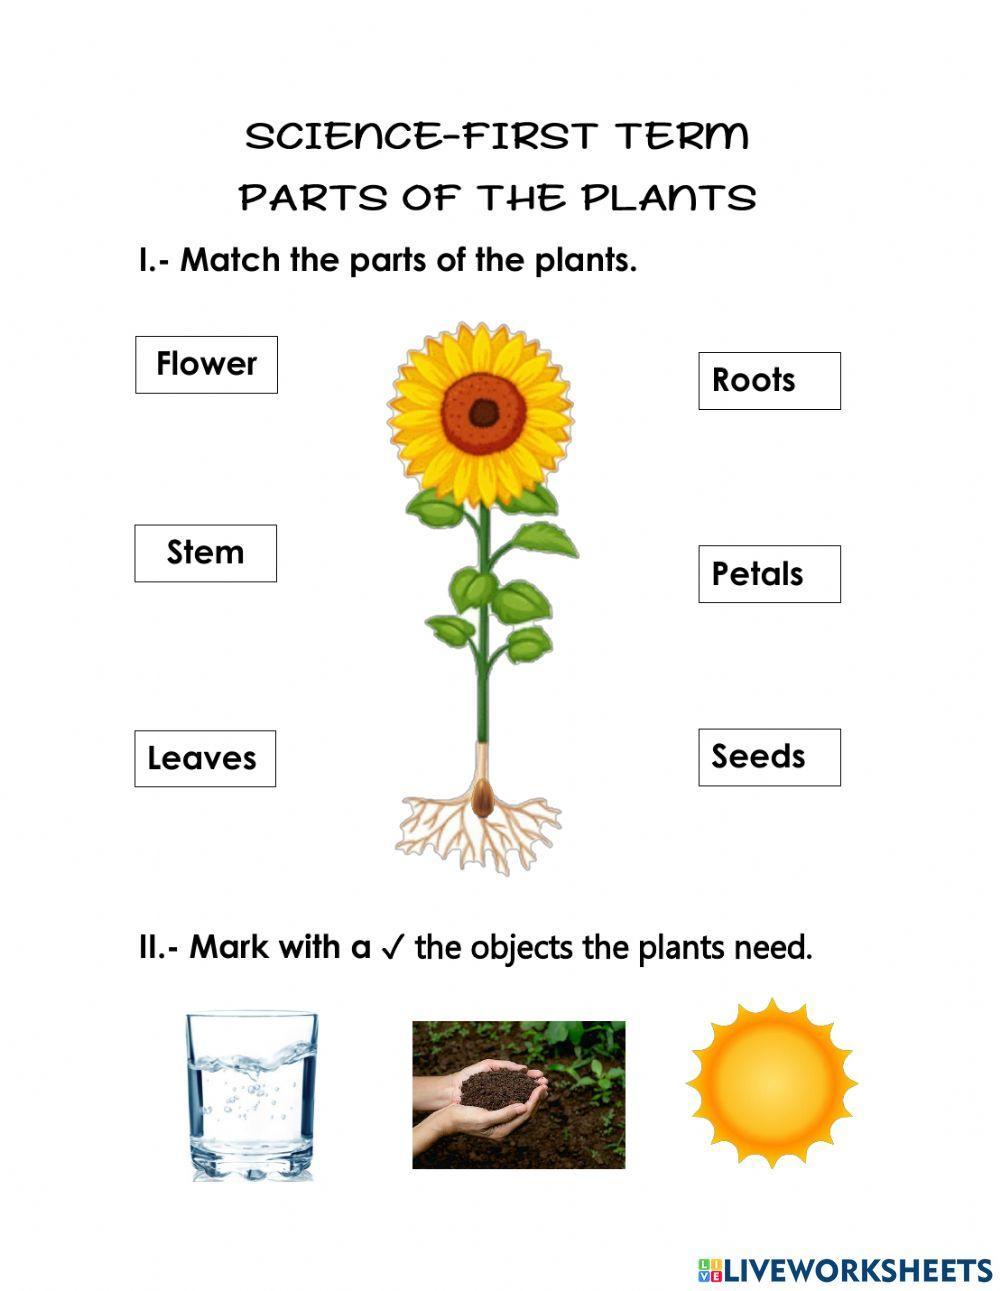 Science first term- parts of the plants